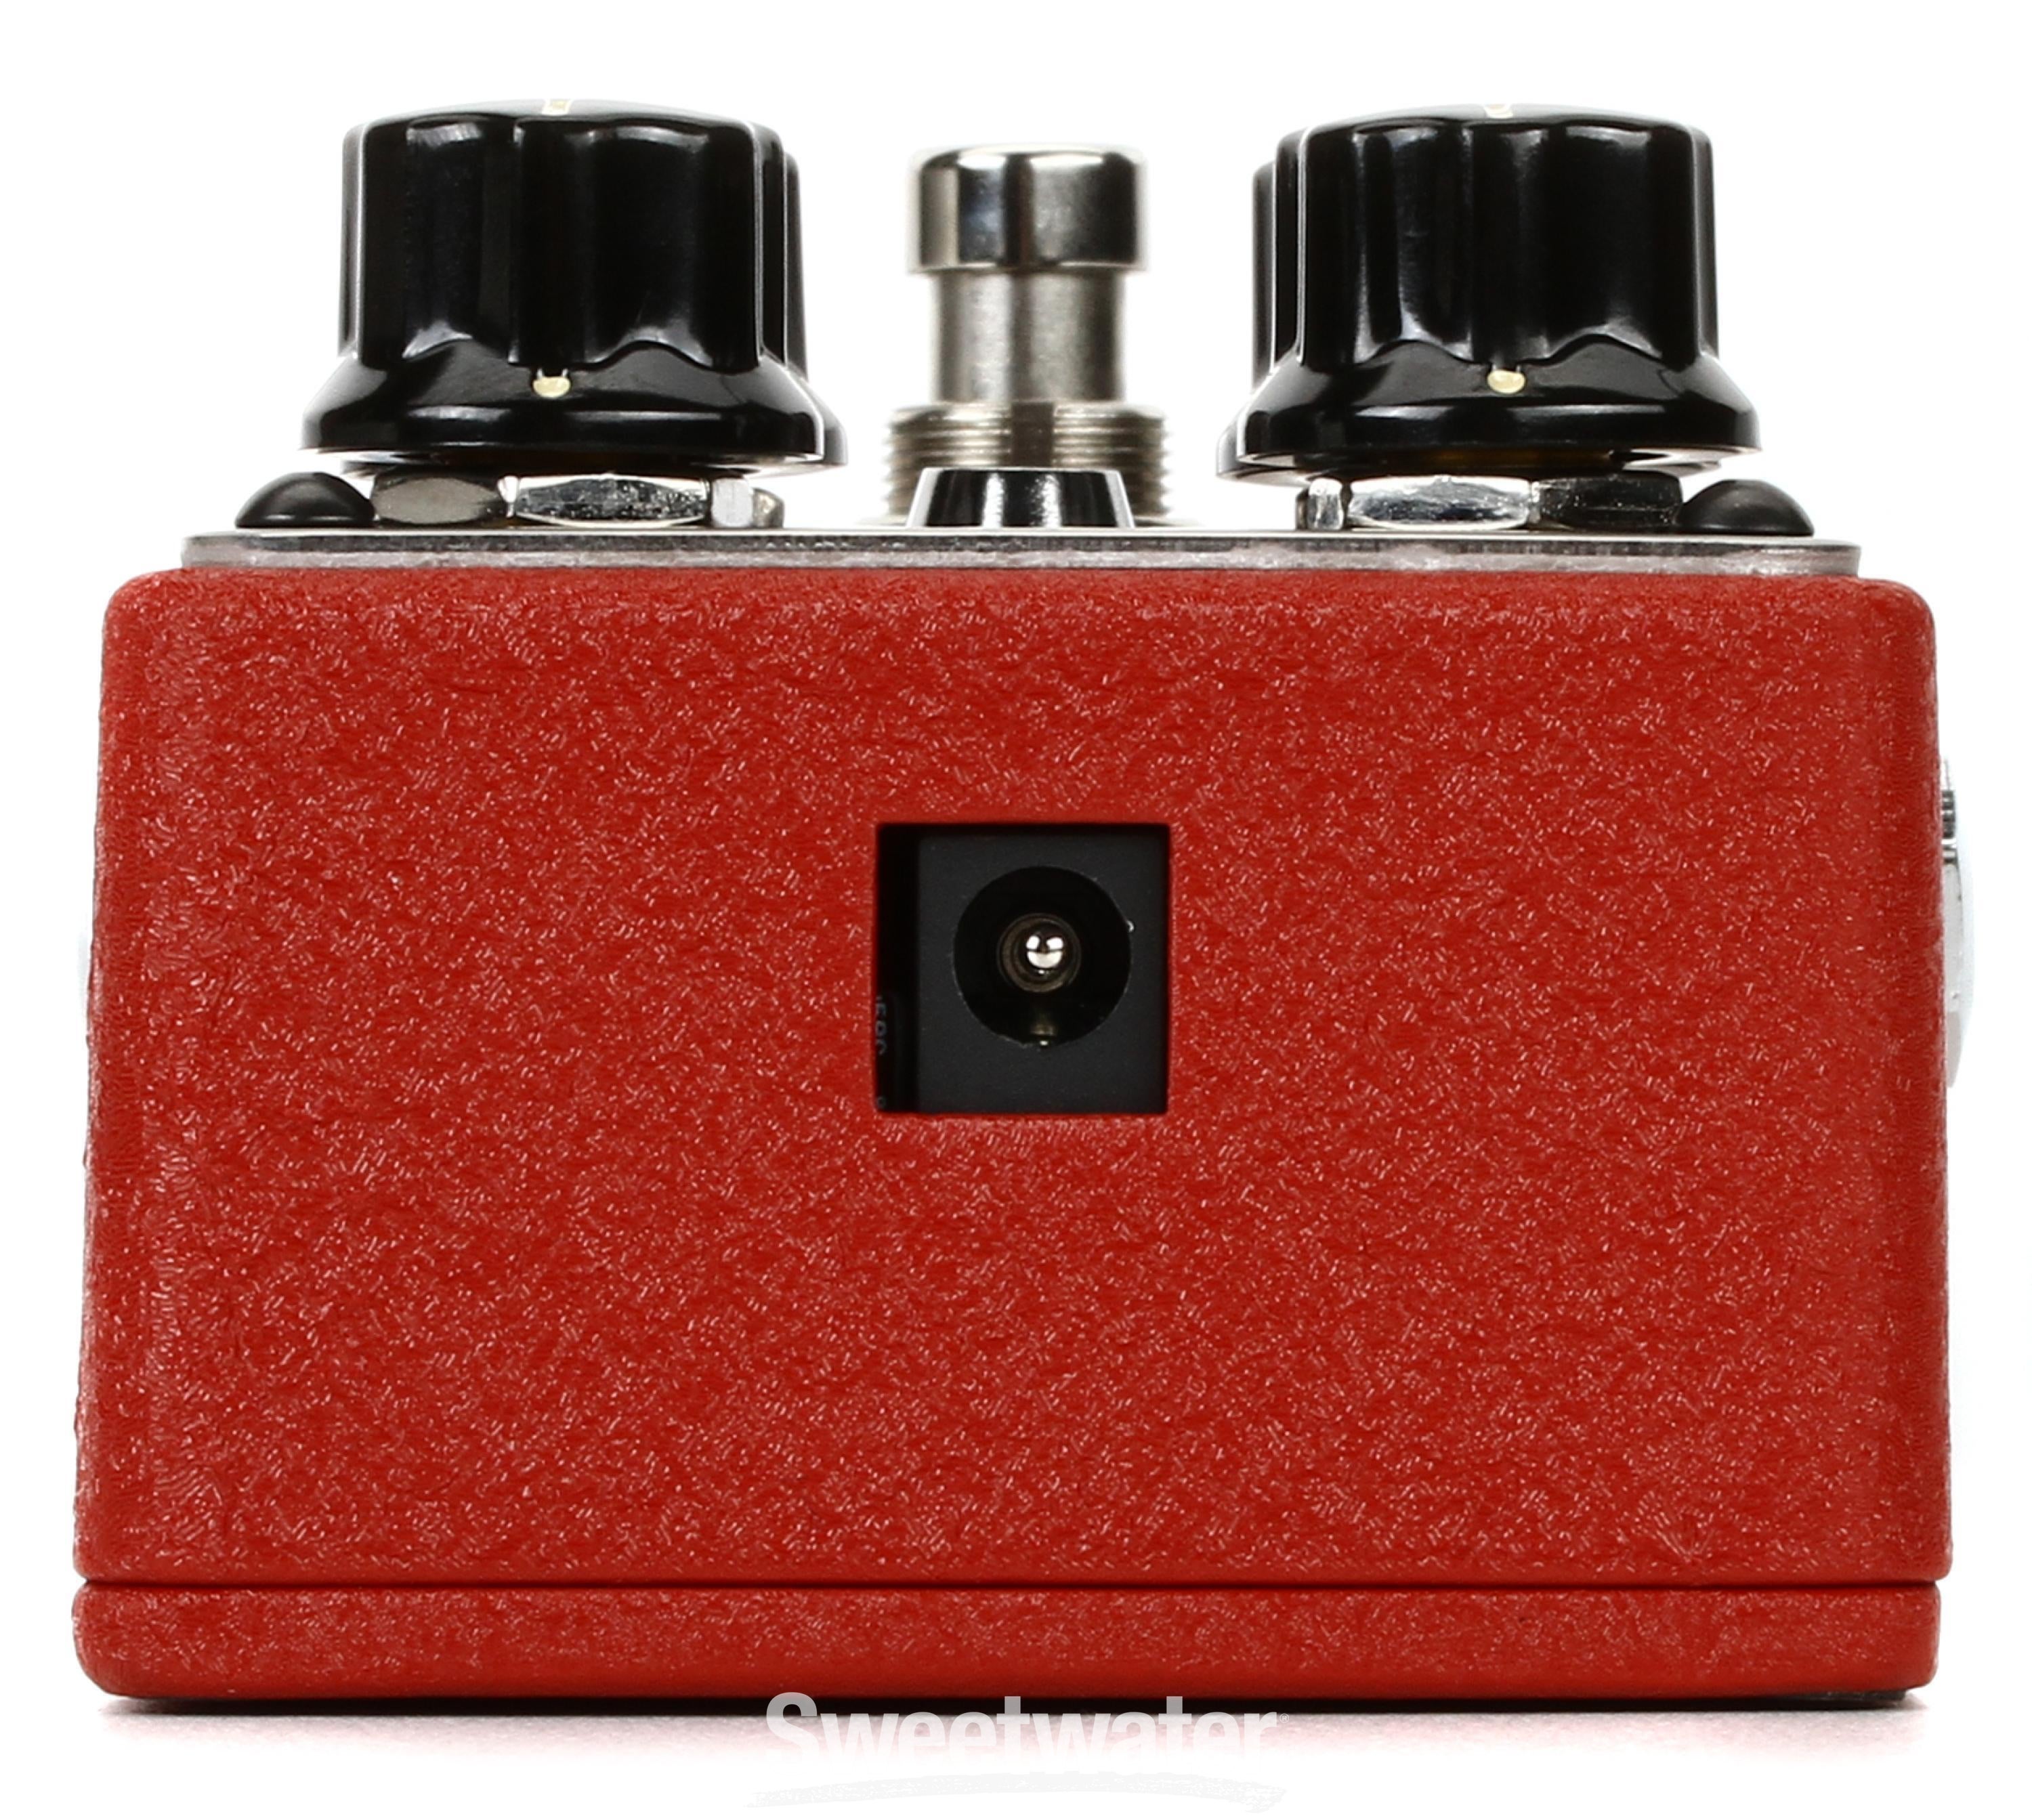 Mesa/Boogie Tone-Burst Clean Boost Pedal | Sweetwater